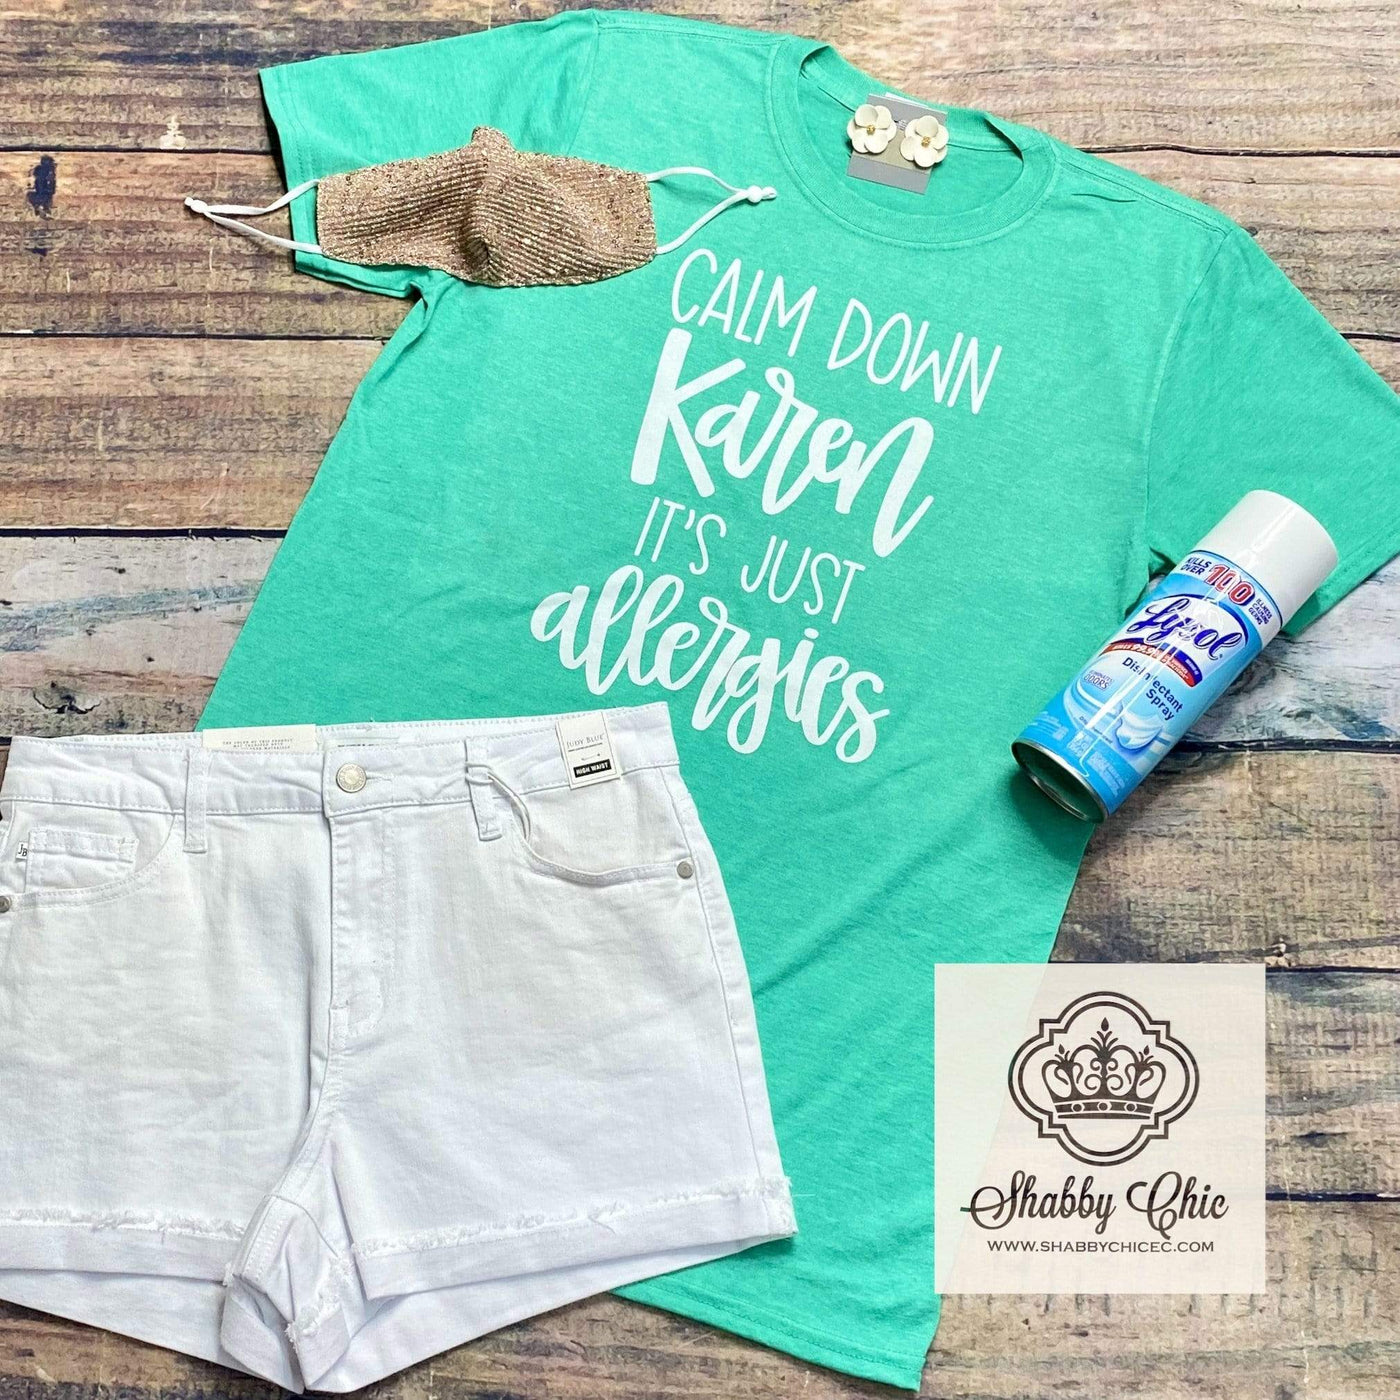 Calm Down Karen Tee - White Lettering Shabby Chic Boutique and Tanning Salon